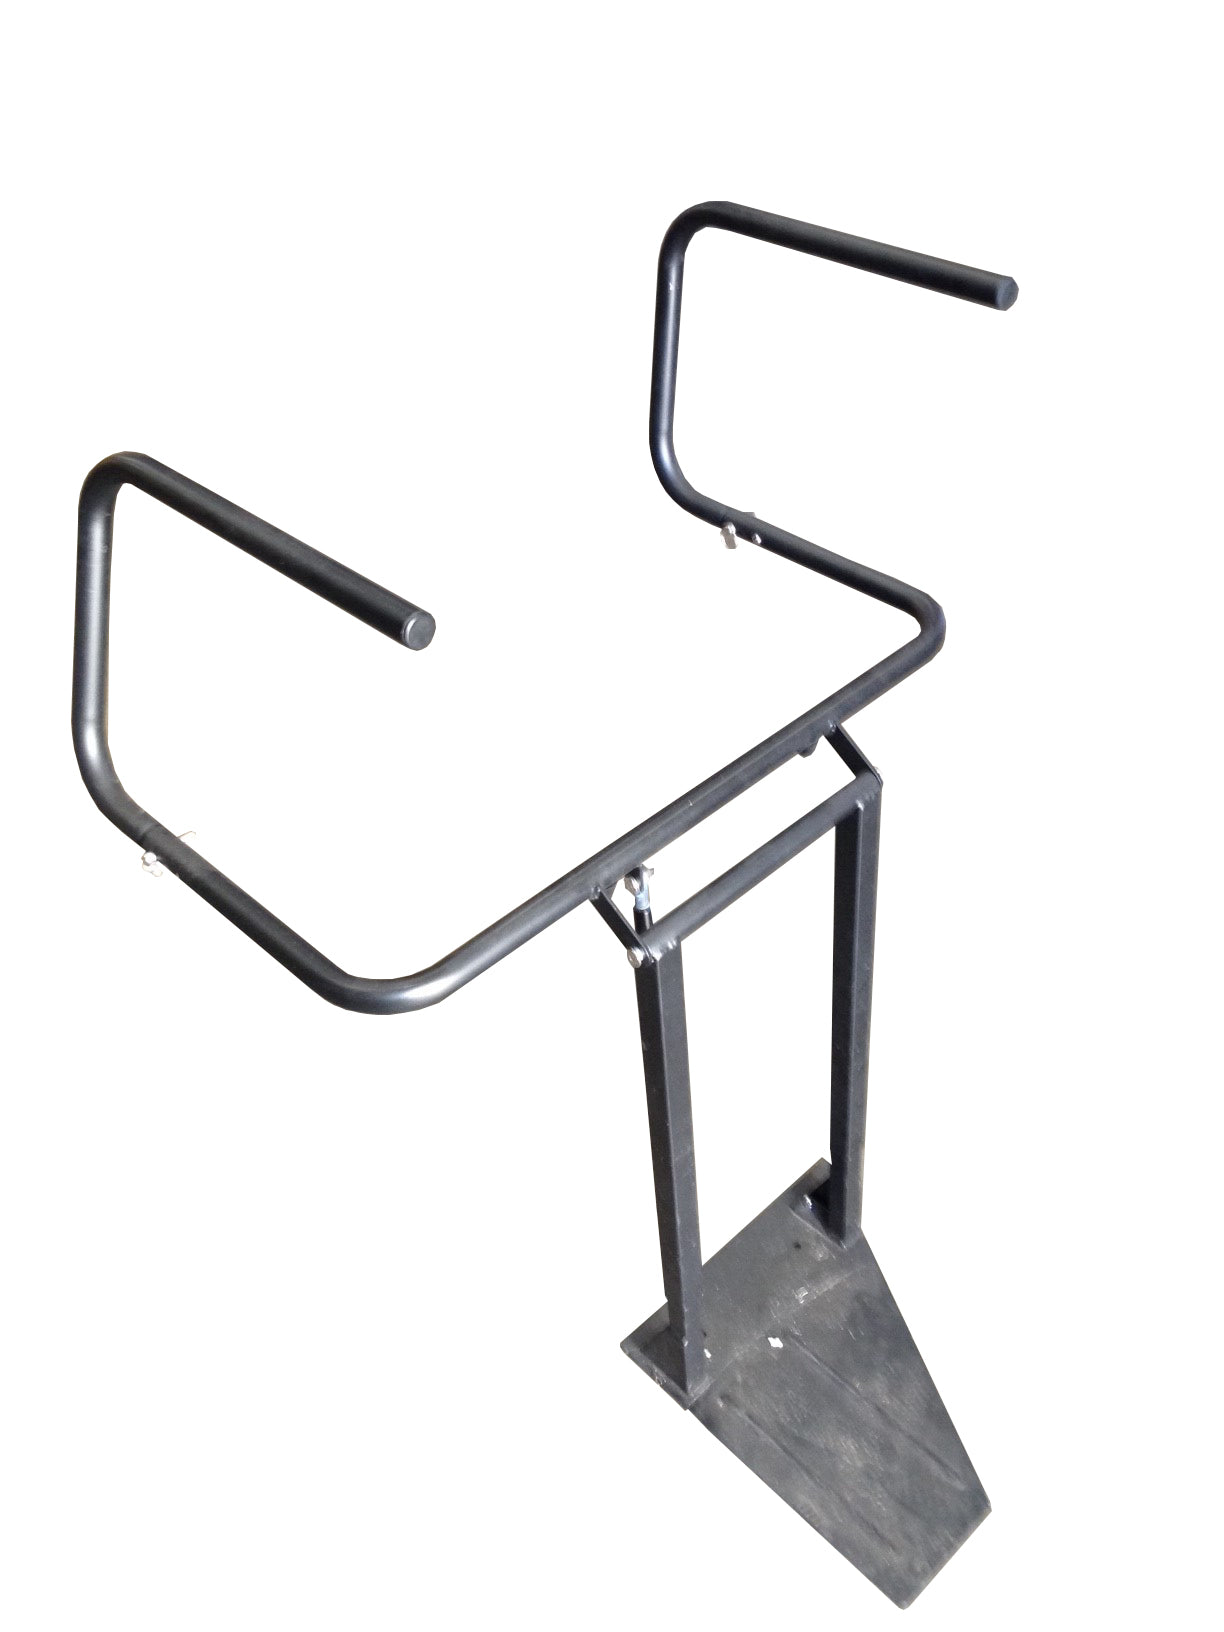 Cradle Cover lifter